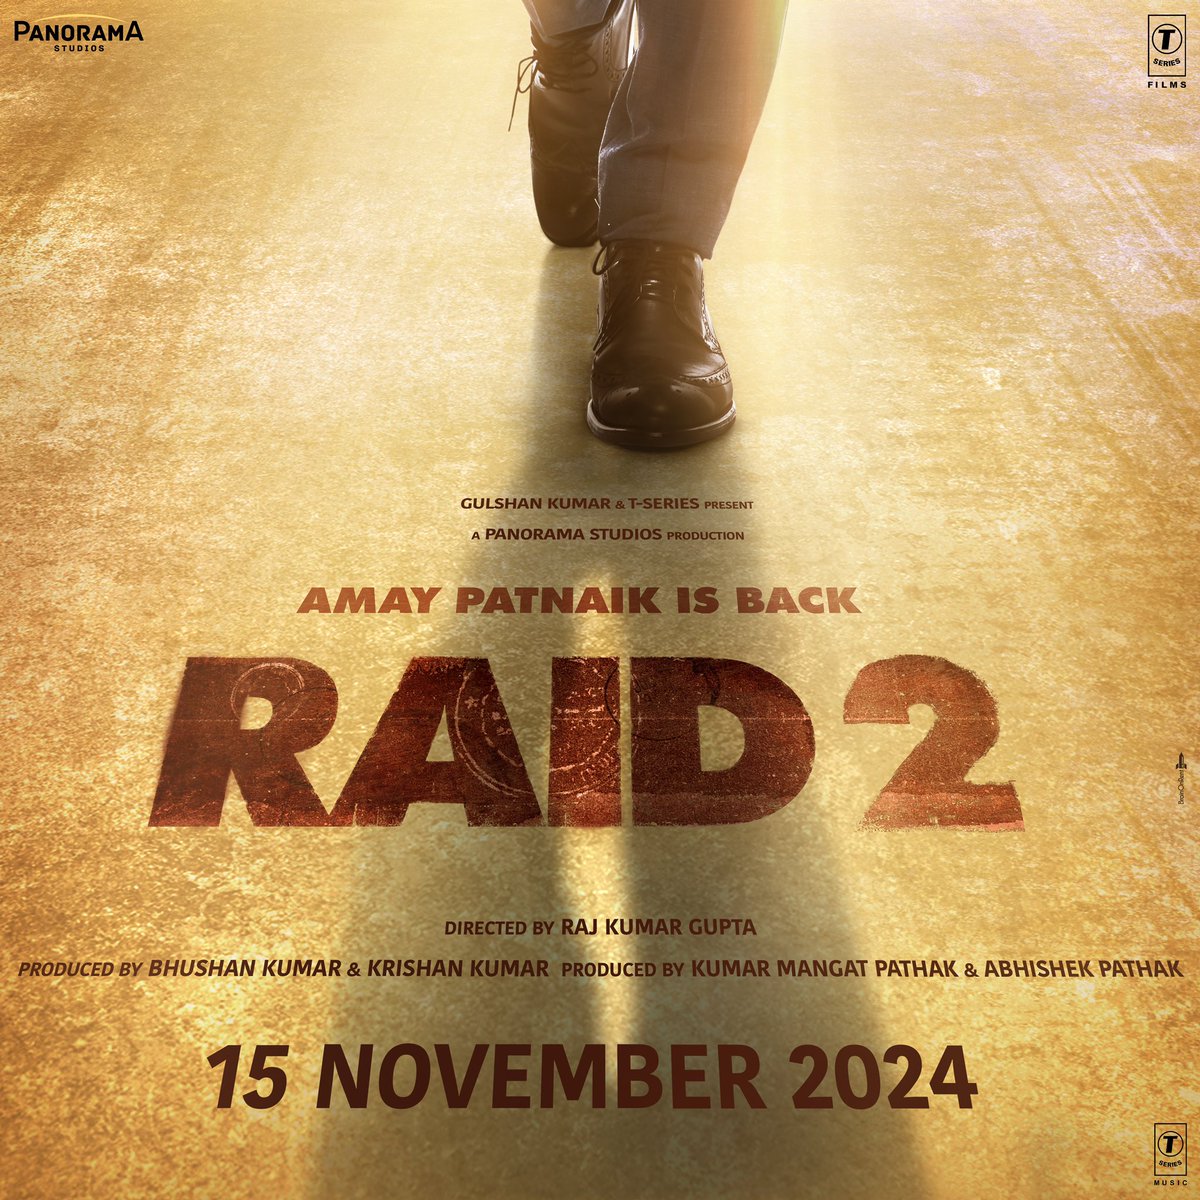 AJAY DEVGN: ‘RAID 2’ STARTS TODAY… 15 NOV 2024 RELEASE… #IRS Officer #AmayPatnaik is back… #AjayDevgn reunites with director #RajkumarGupta for #Raid2, the sequel to #Raid [2018].

The film commences shoot in #Mumbai today and will be extensively shot in #Mumbai, #Delhi, #UP